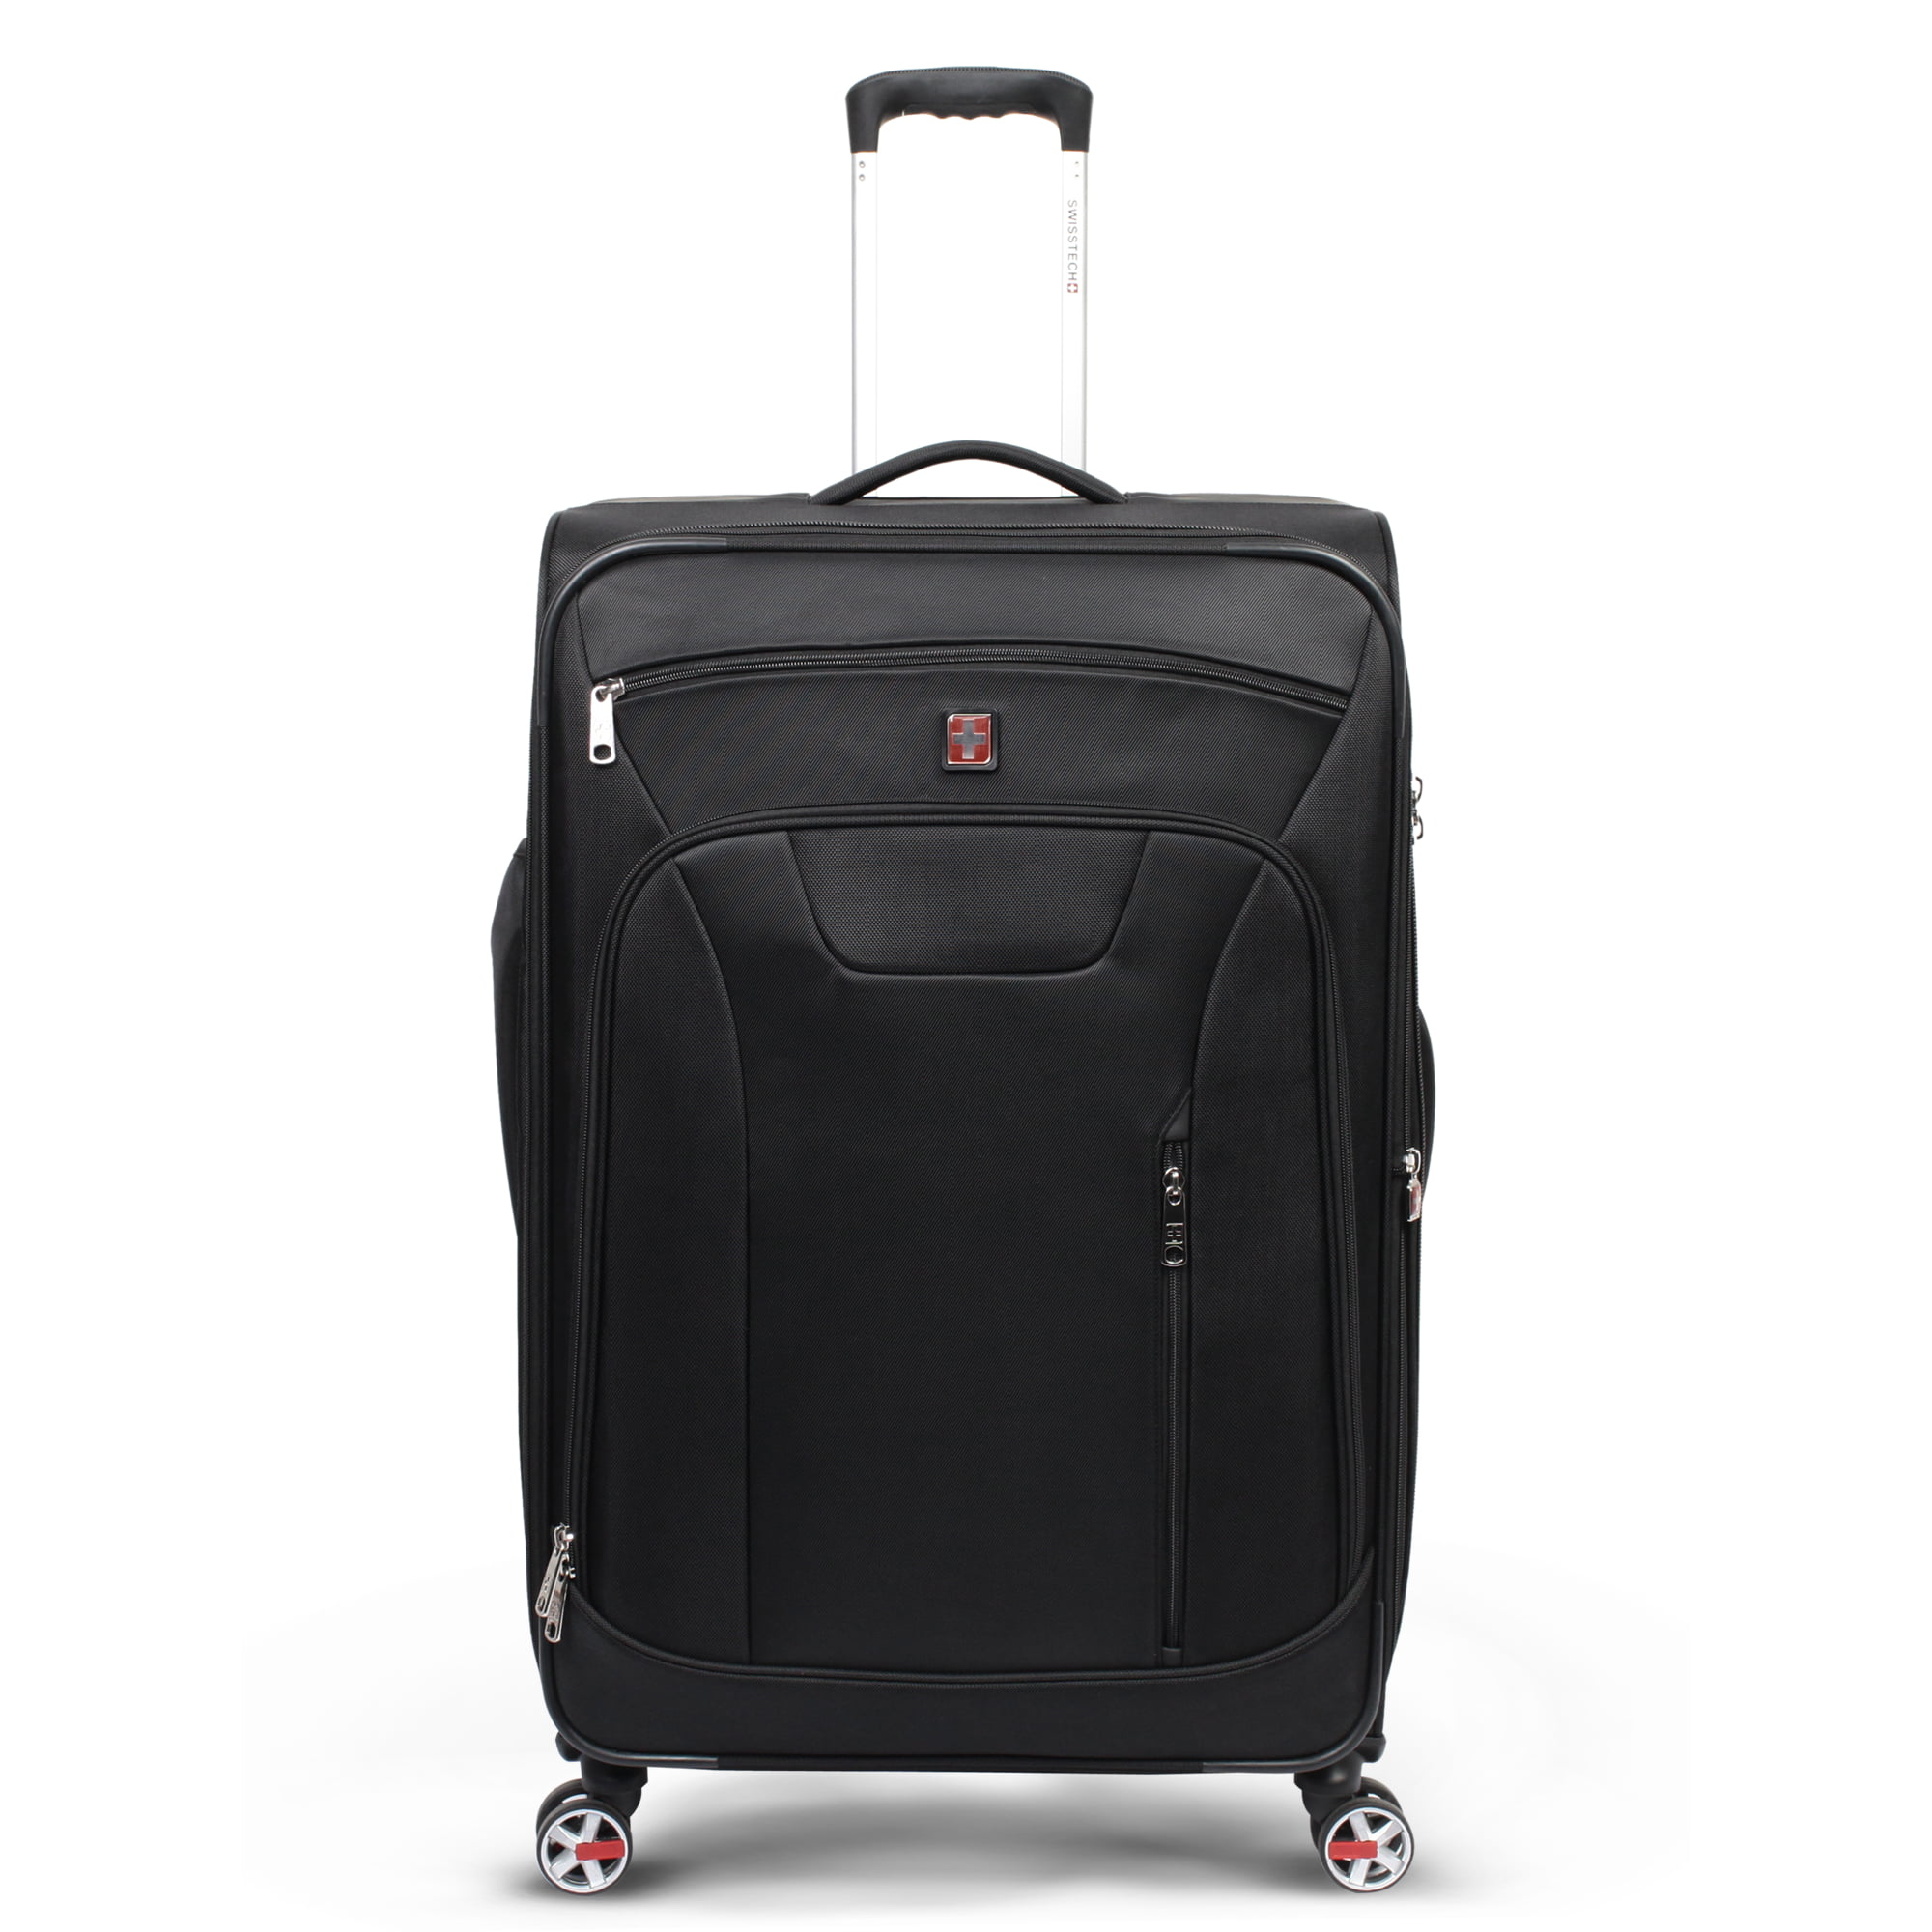 Swiss gear Softside Extendable Luggage